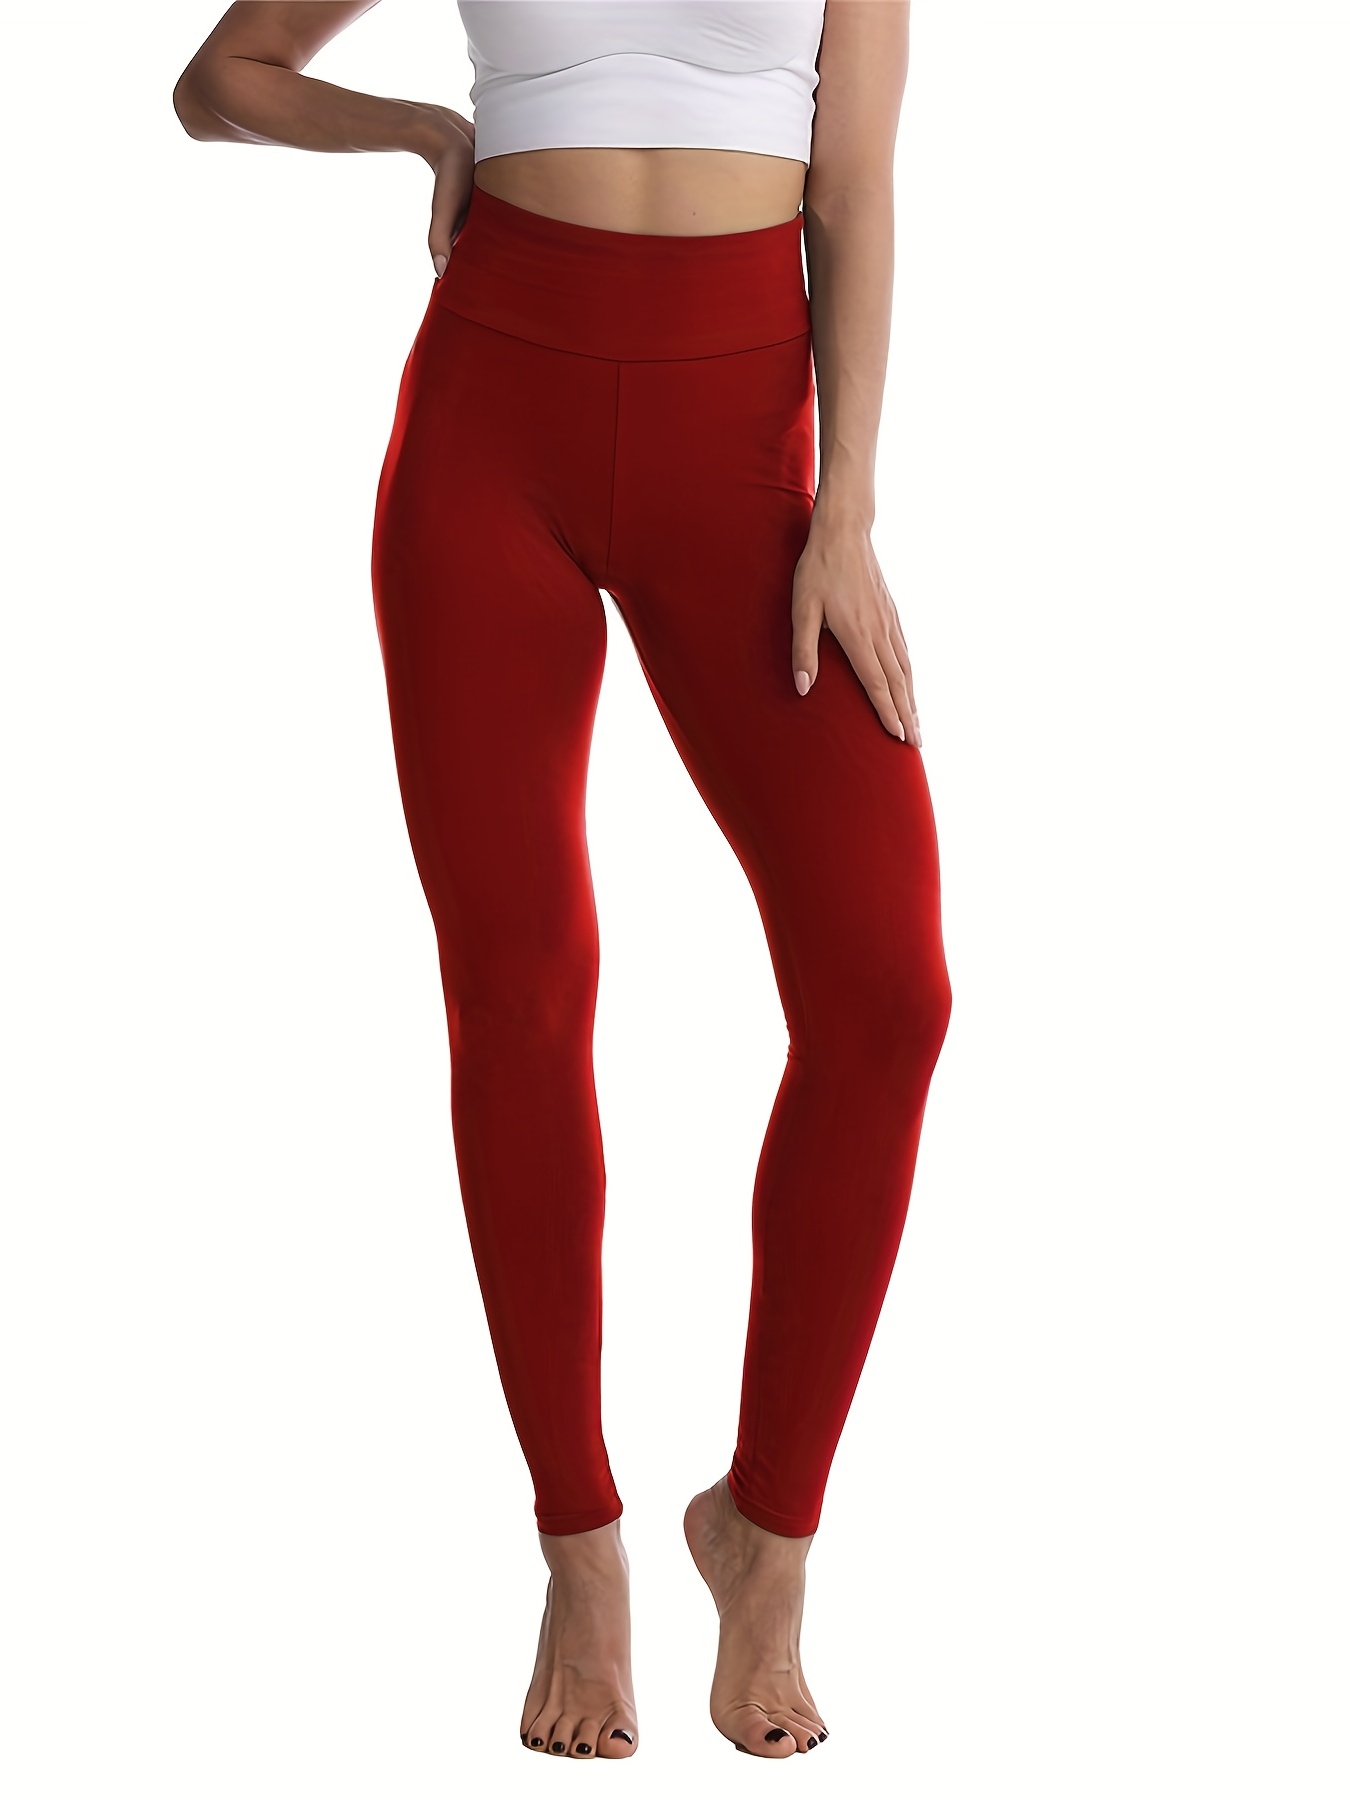 Yuiboo Red Solid Color Pure Plain Yoga Leggings for Women with Pockets  Pants Sports High Waisted Compression Leggings for Women X-Small at   Women's Clothing store